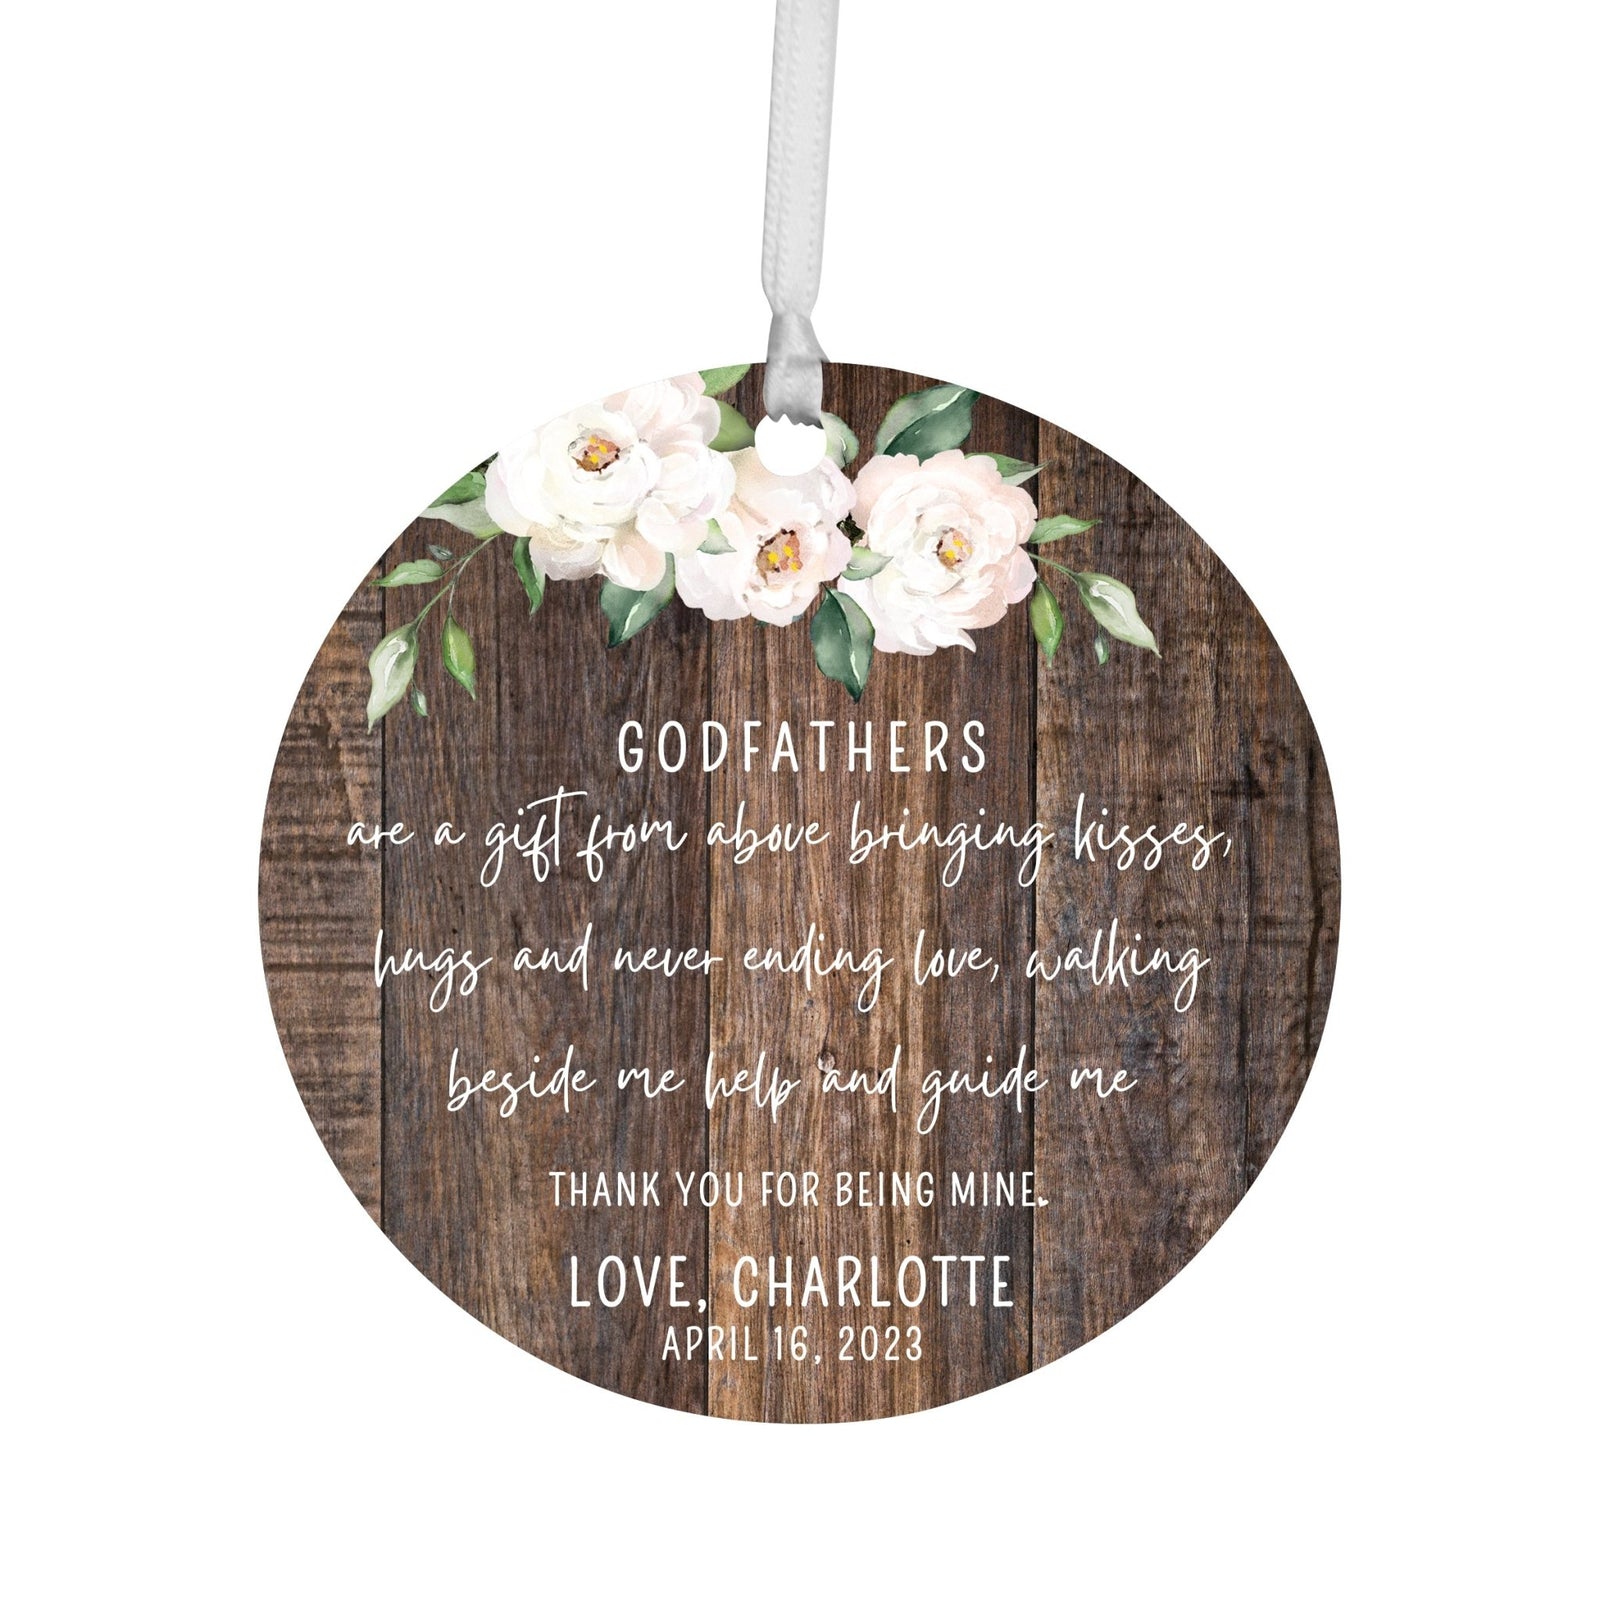 Personalized Unique Wooden Baptism Hanging Ornament Gift for Godfather - Are A Gift From Above - LifeSong Milestones